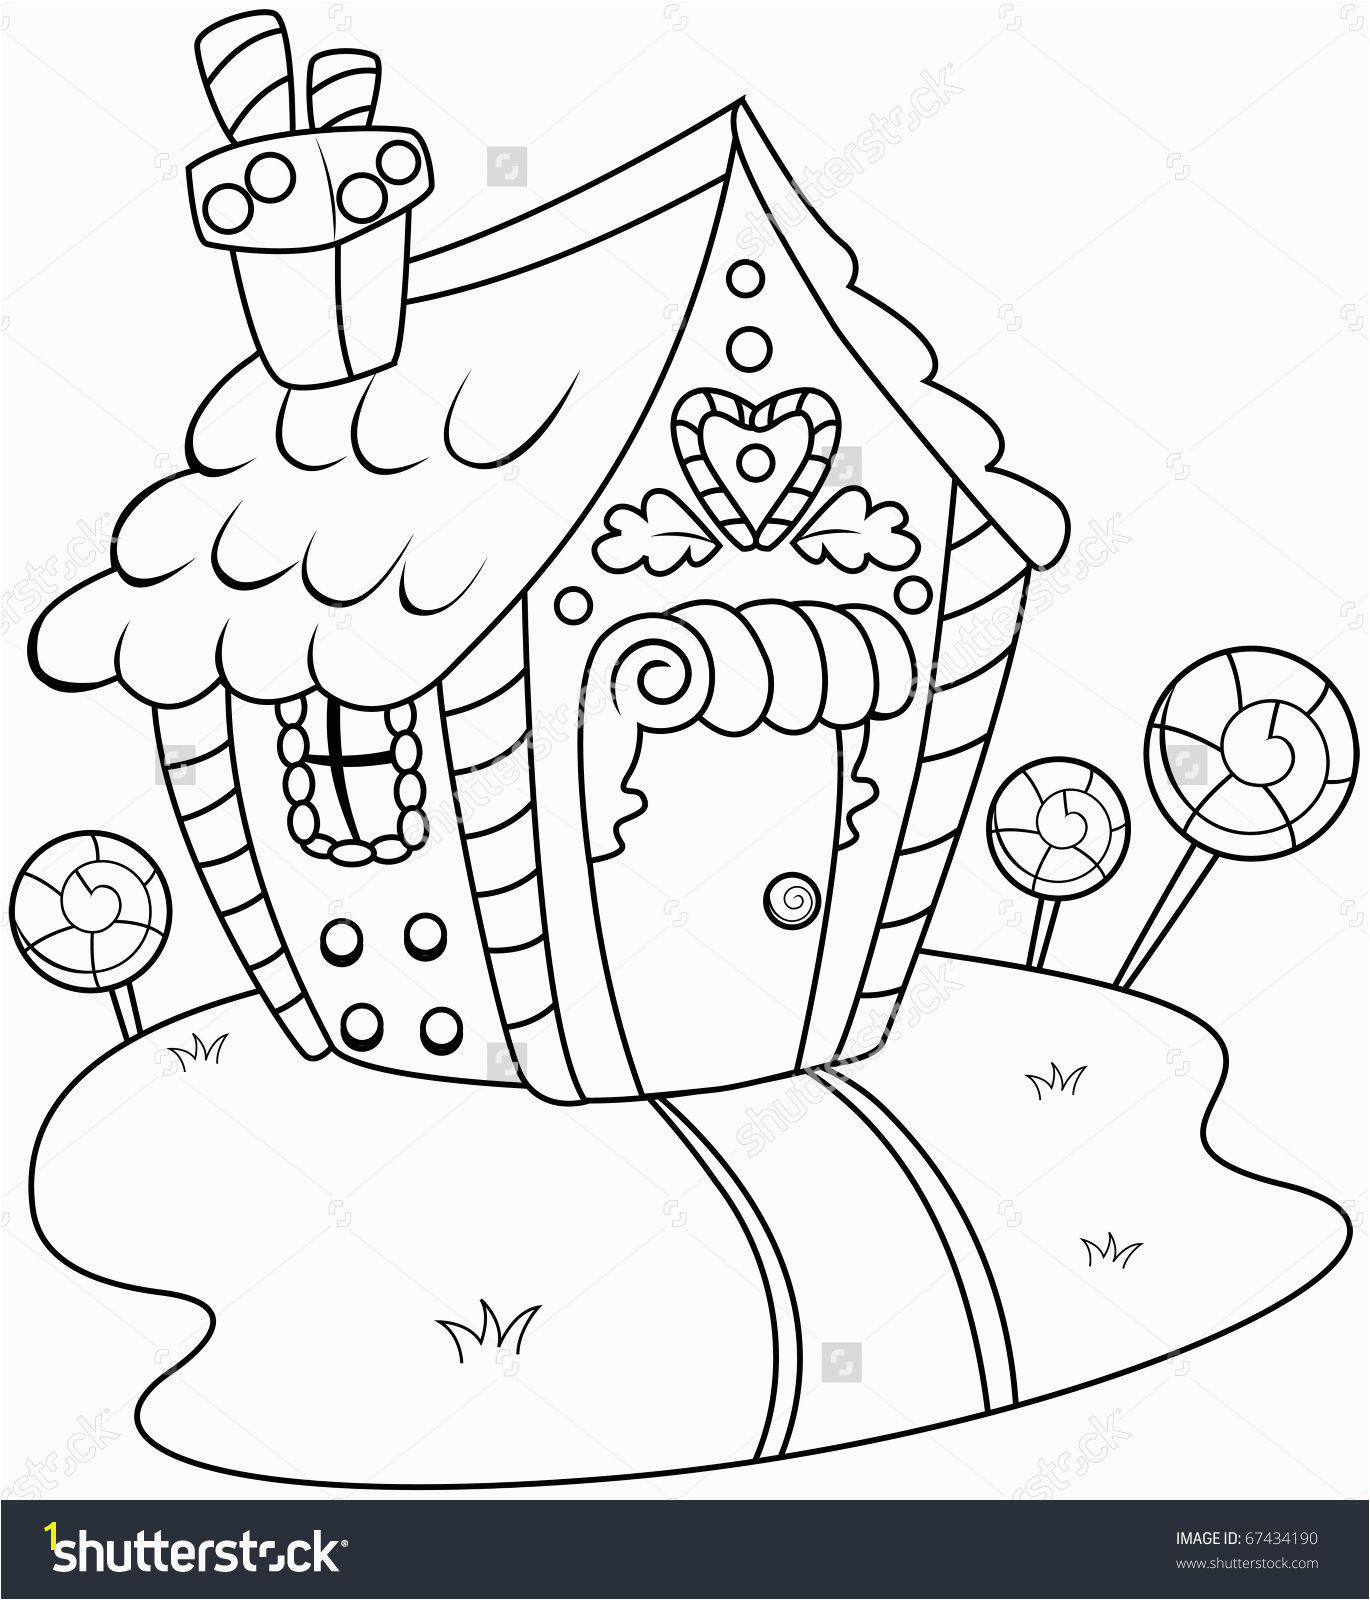 Gingerbread Man House Coloring Pages Hansel and Gretel Candy House Coloring Page Coloring Pages